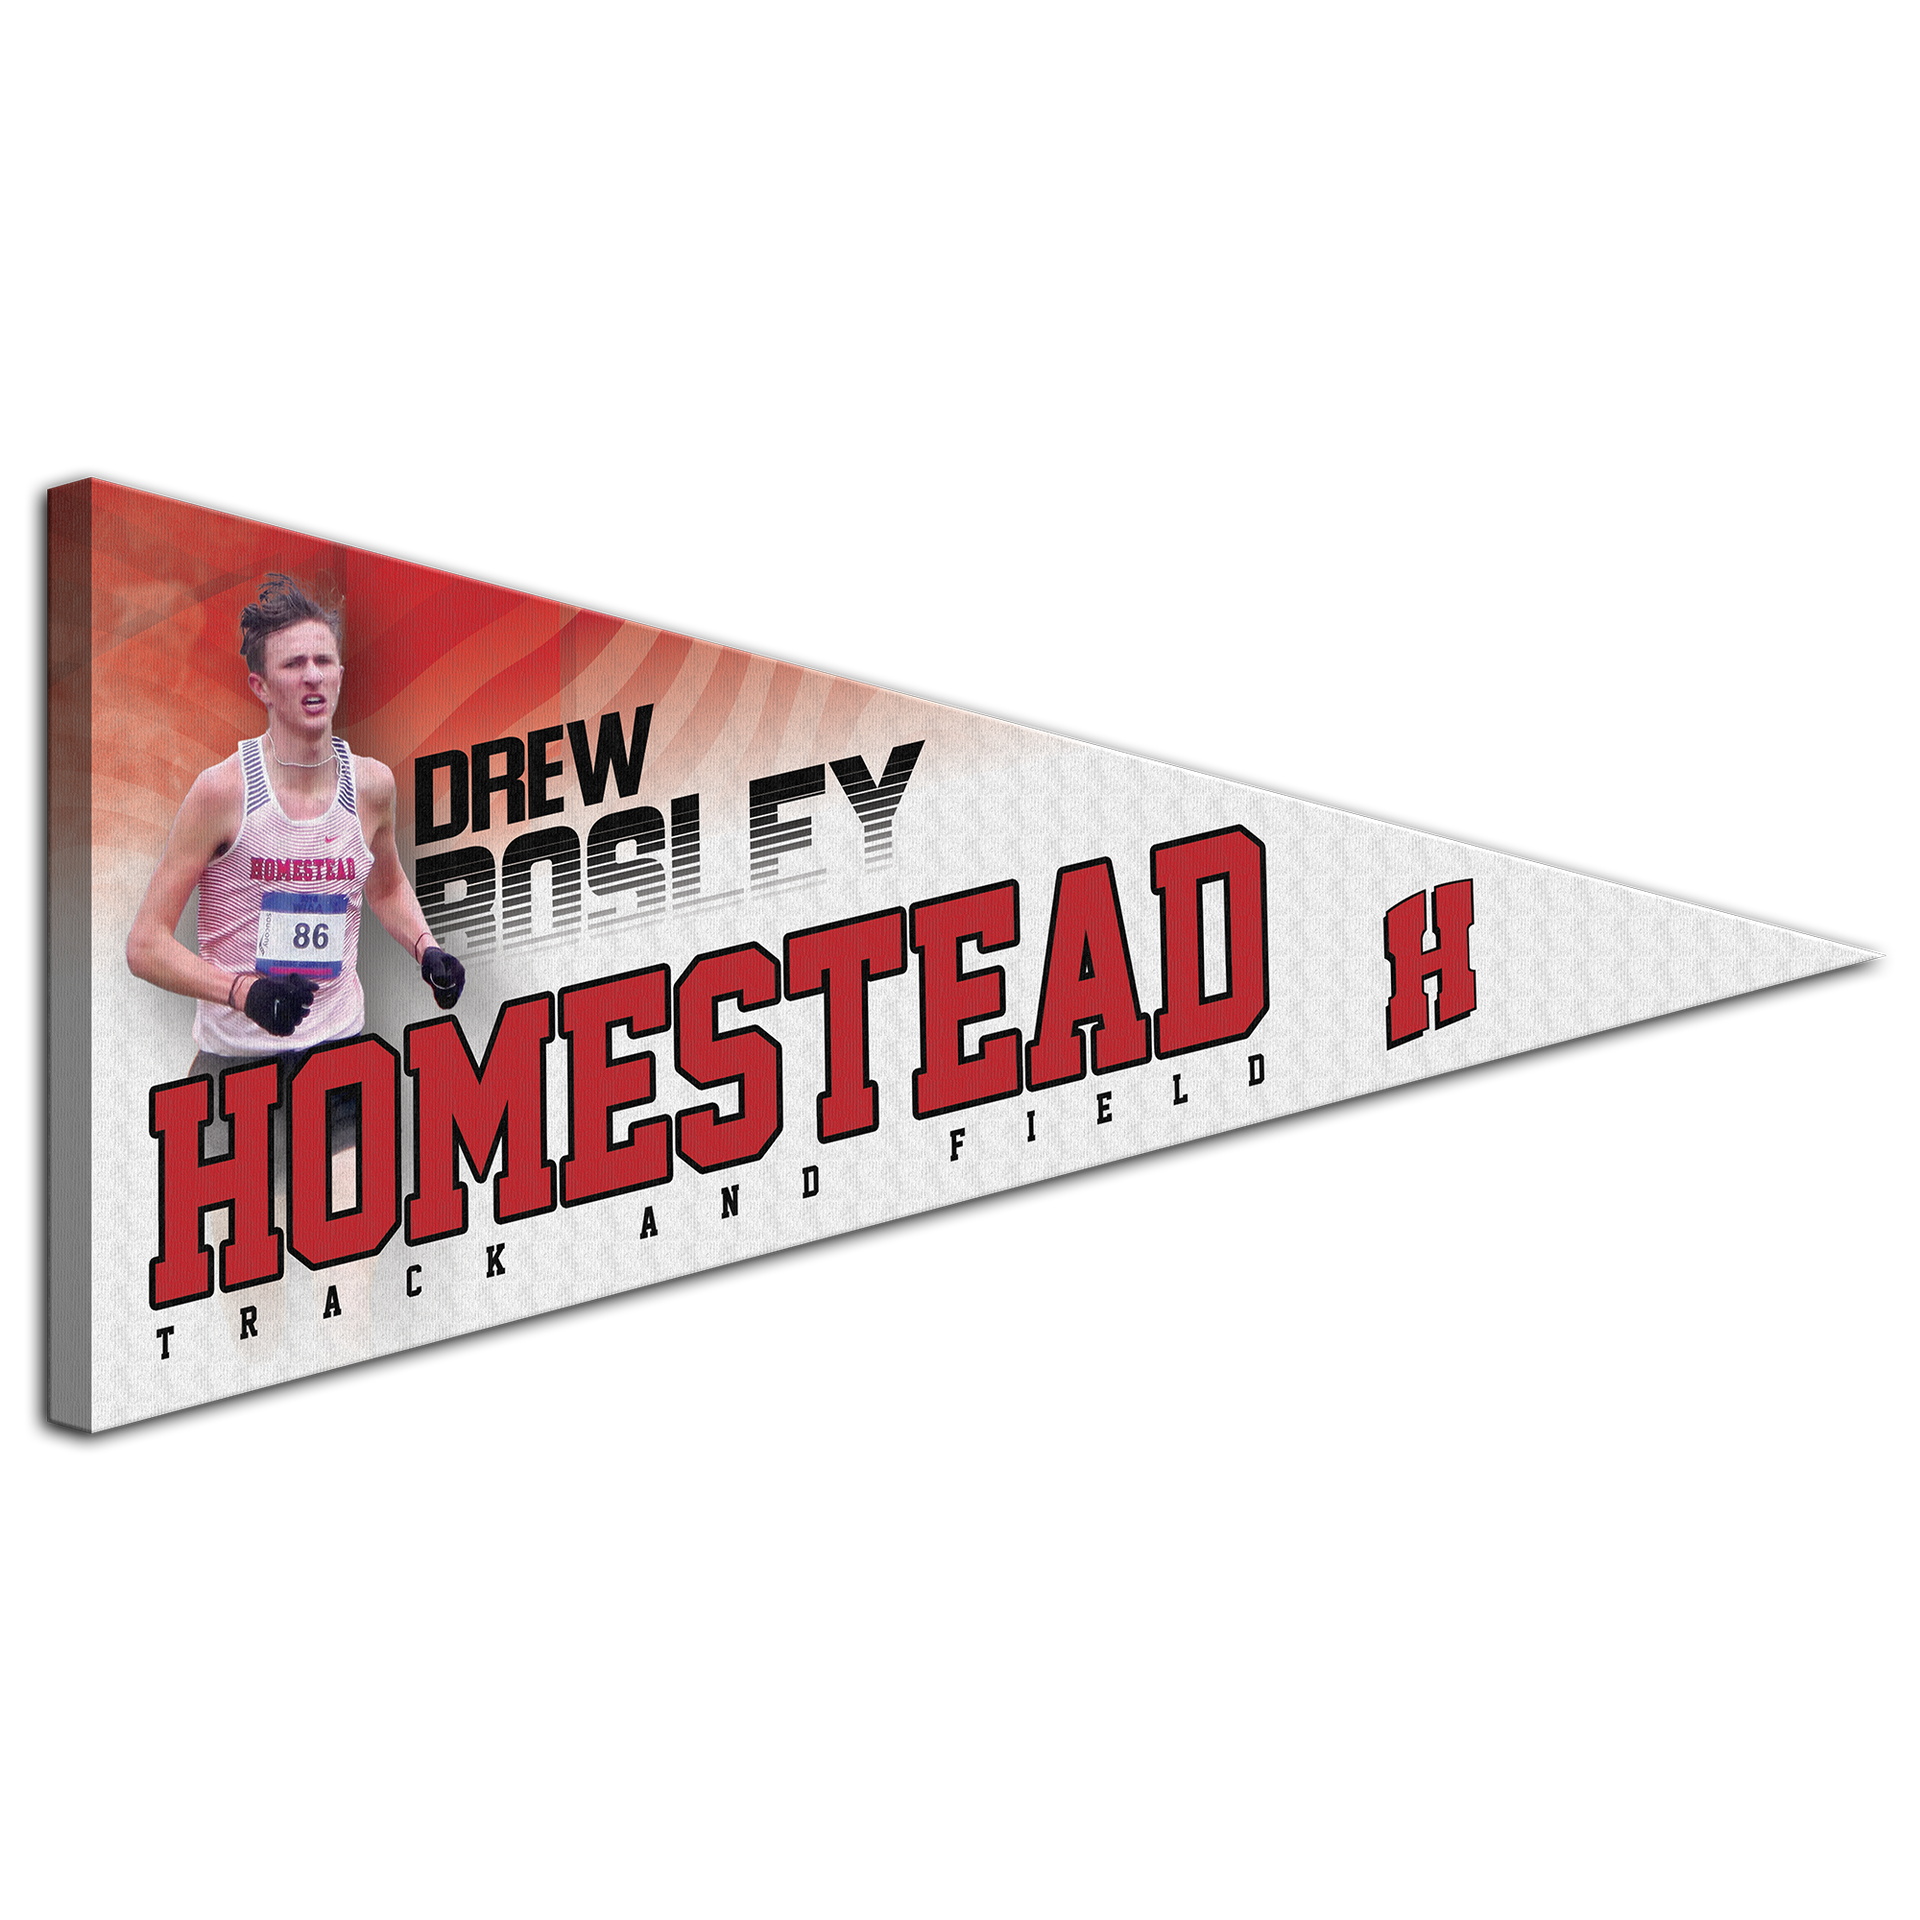 Collectible Canvas Whitewash Template for Drew Bosley of Homestead Track